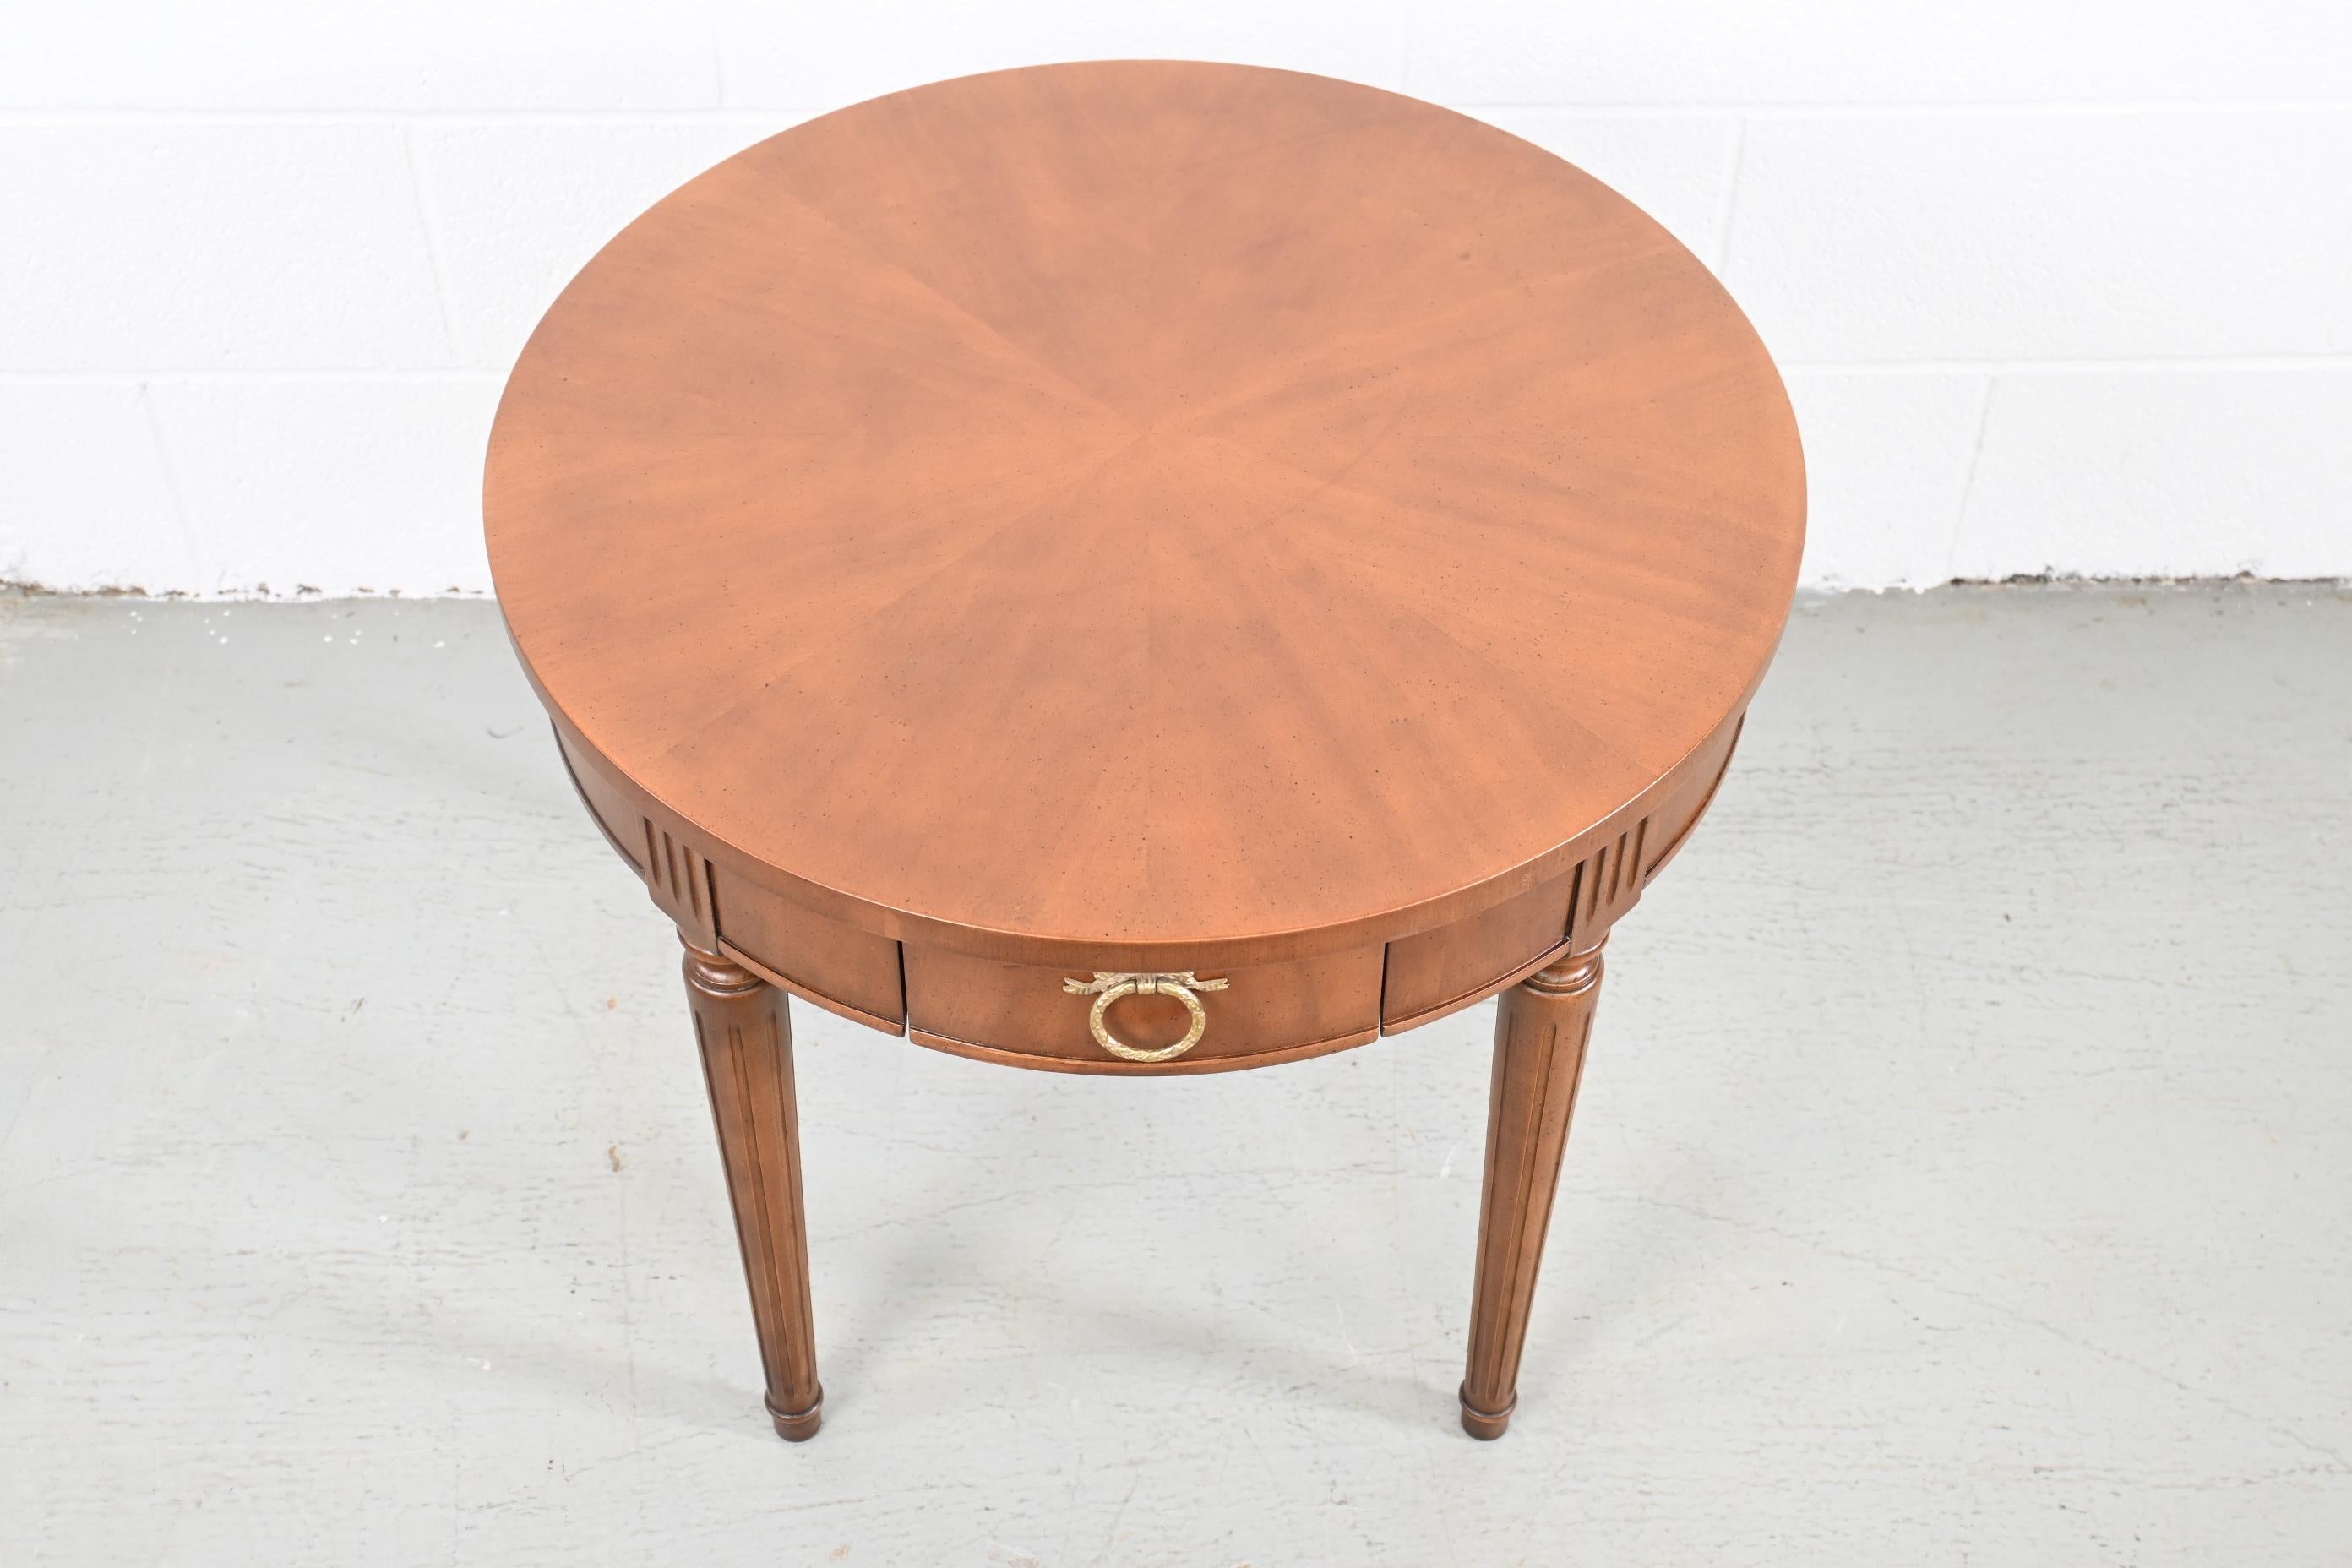 Wood Kindel Furniture Neoclassical Style Round Side or End Table